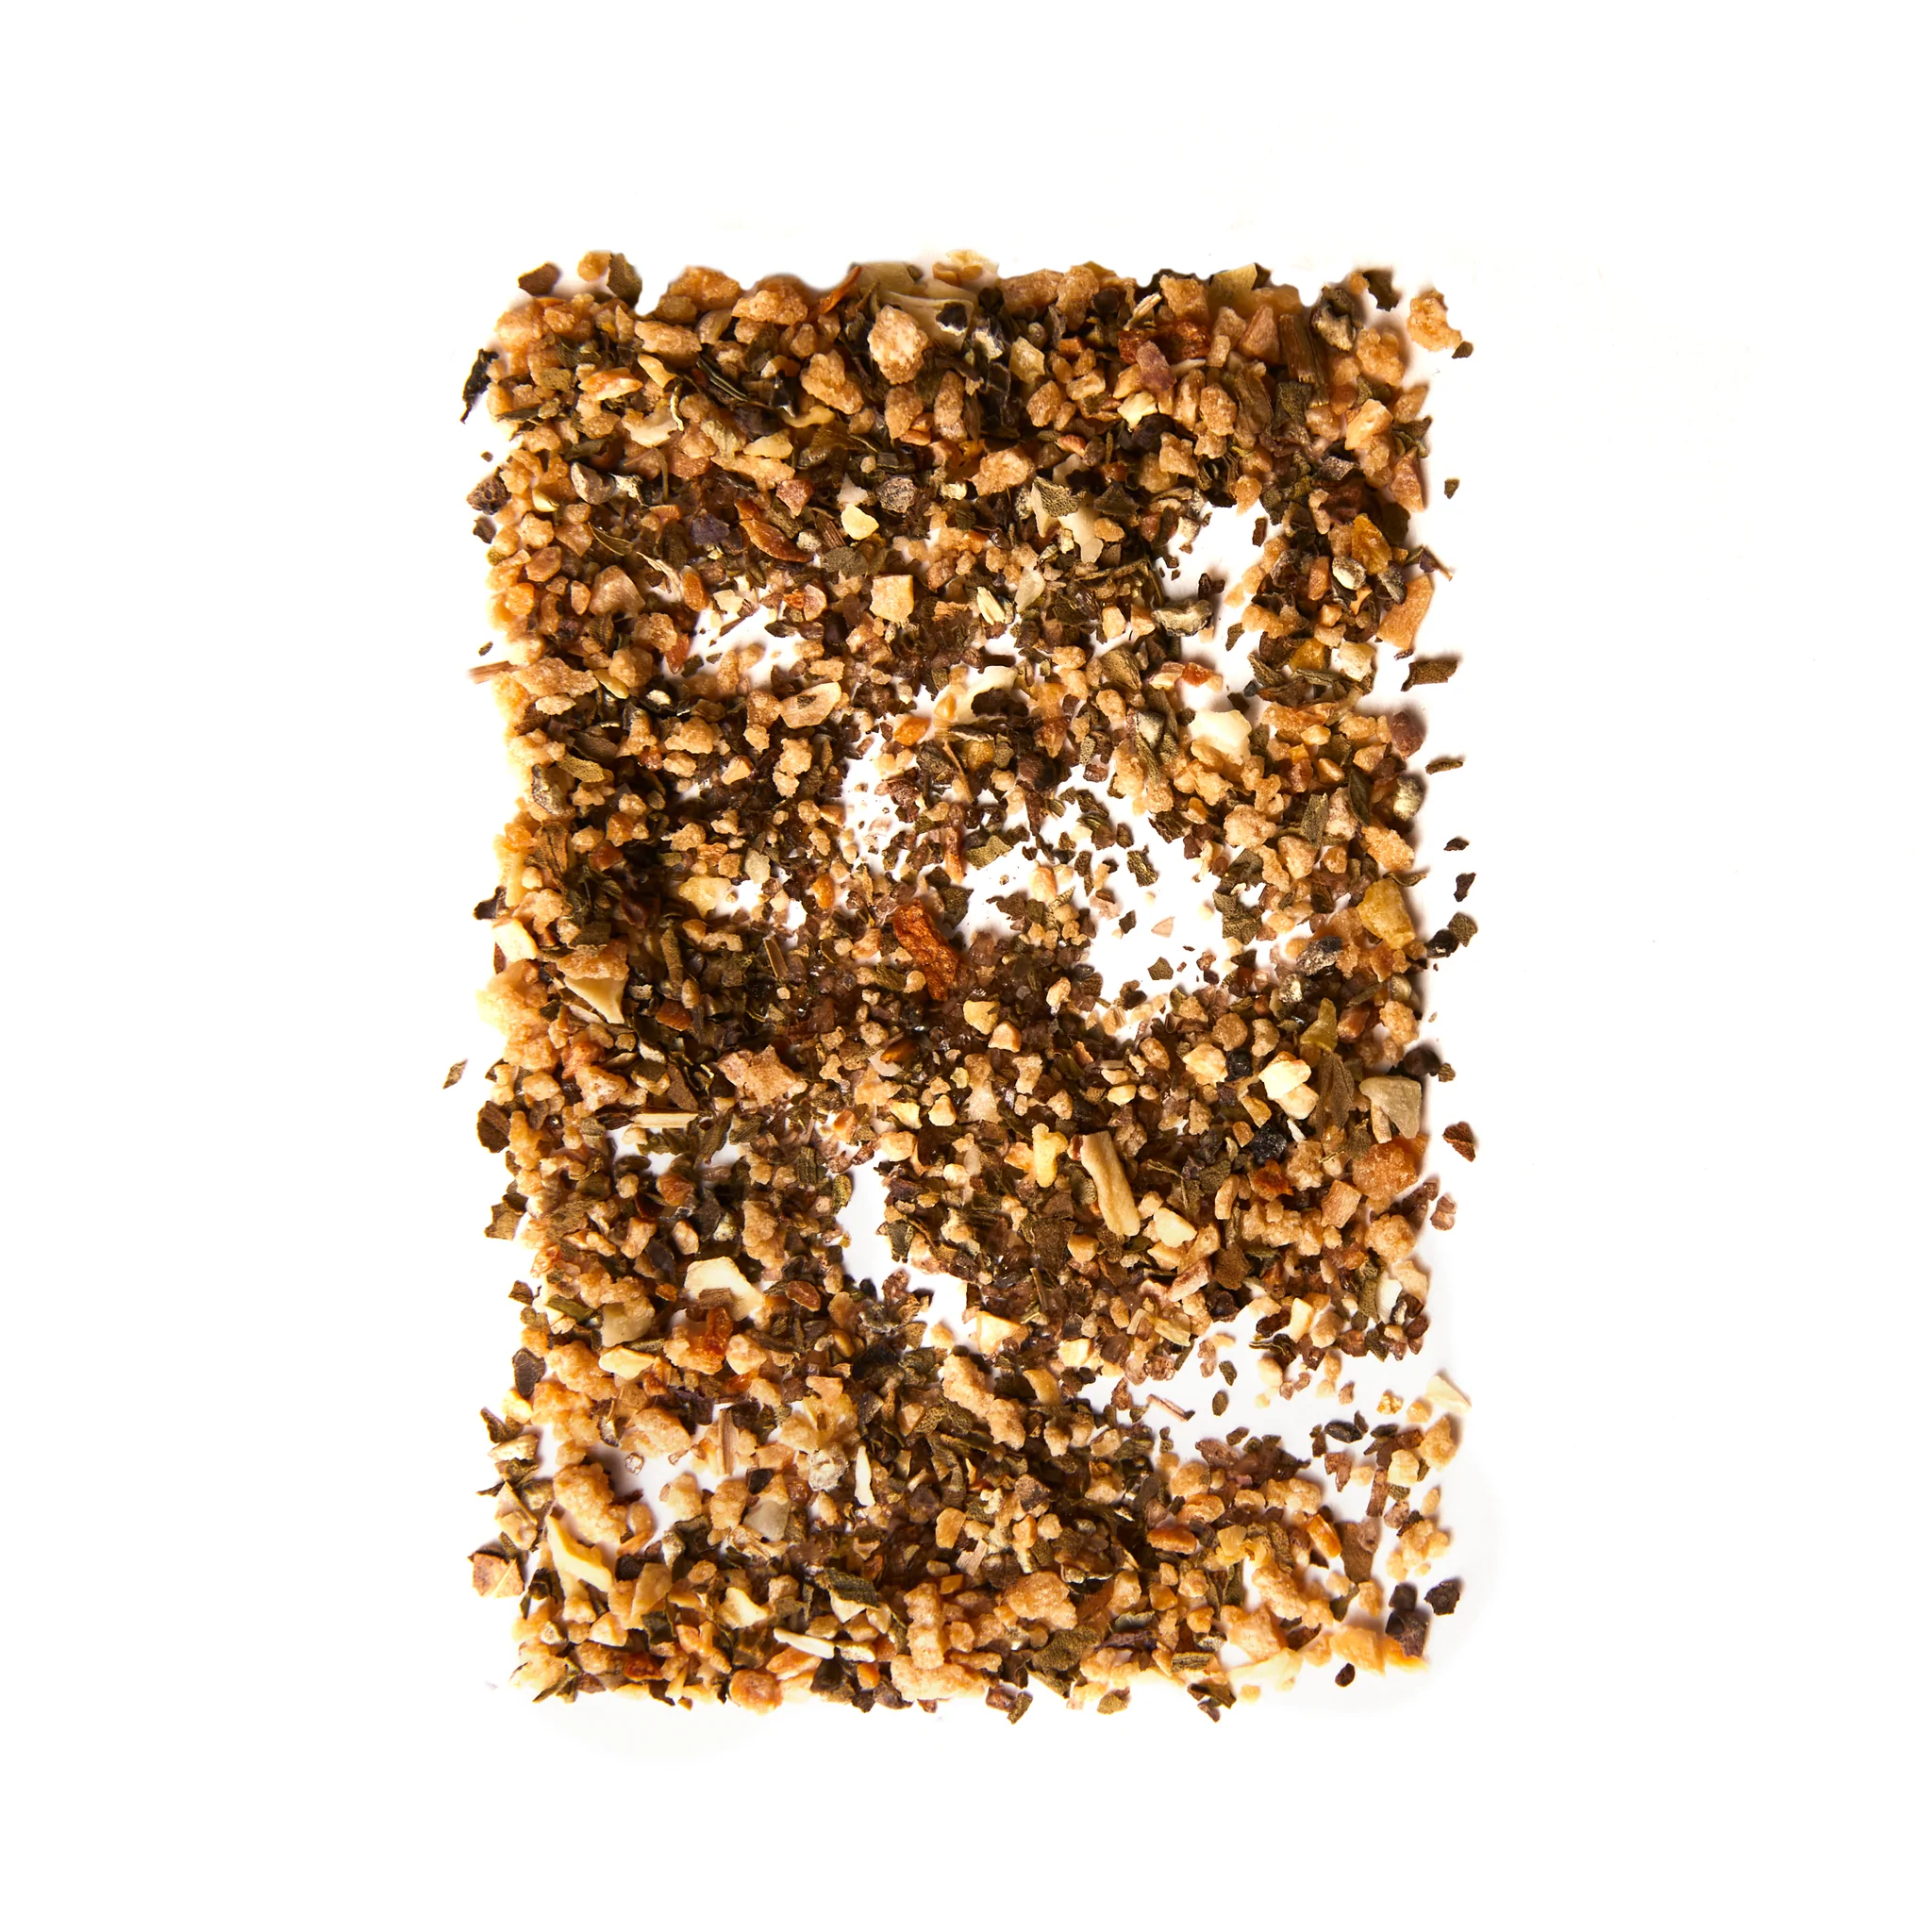 pile of quebec maple smoked salt shaped into a rectangle on white background